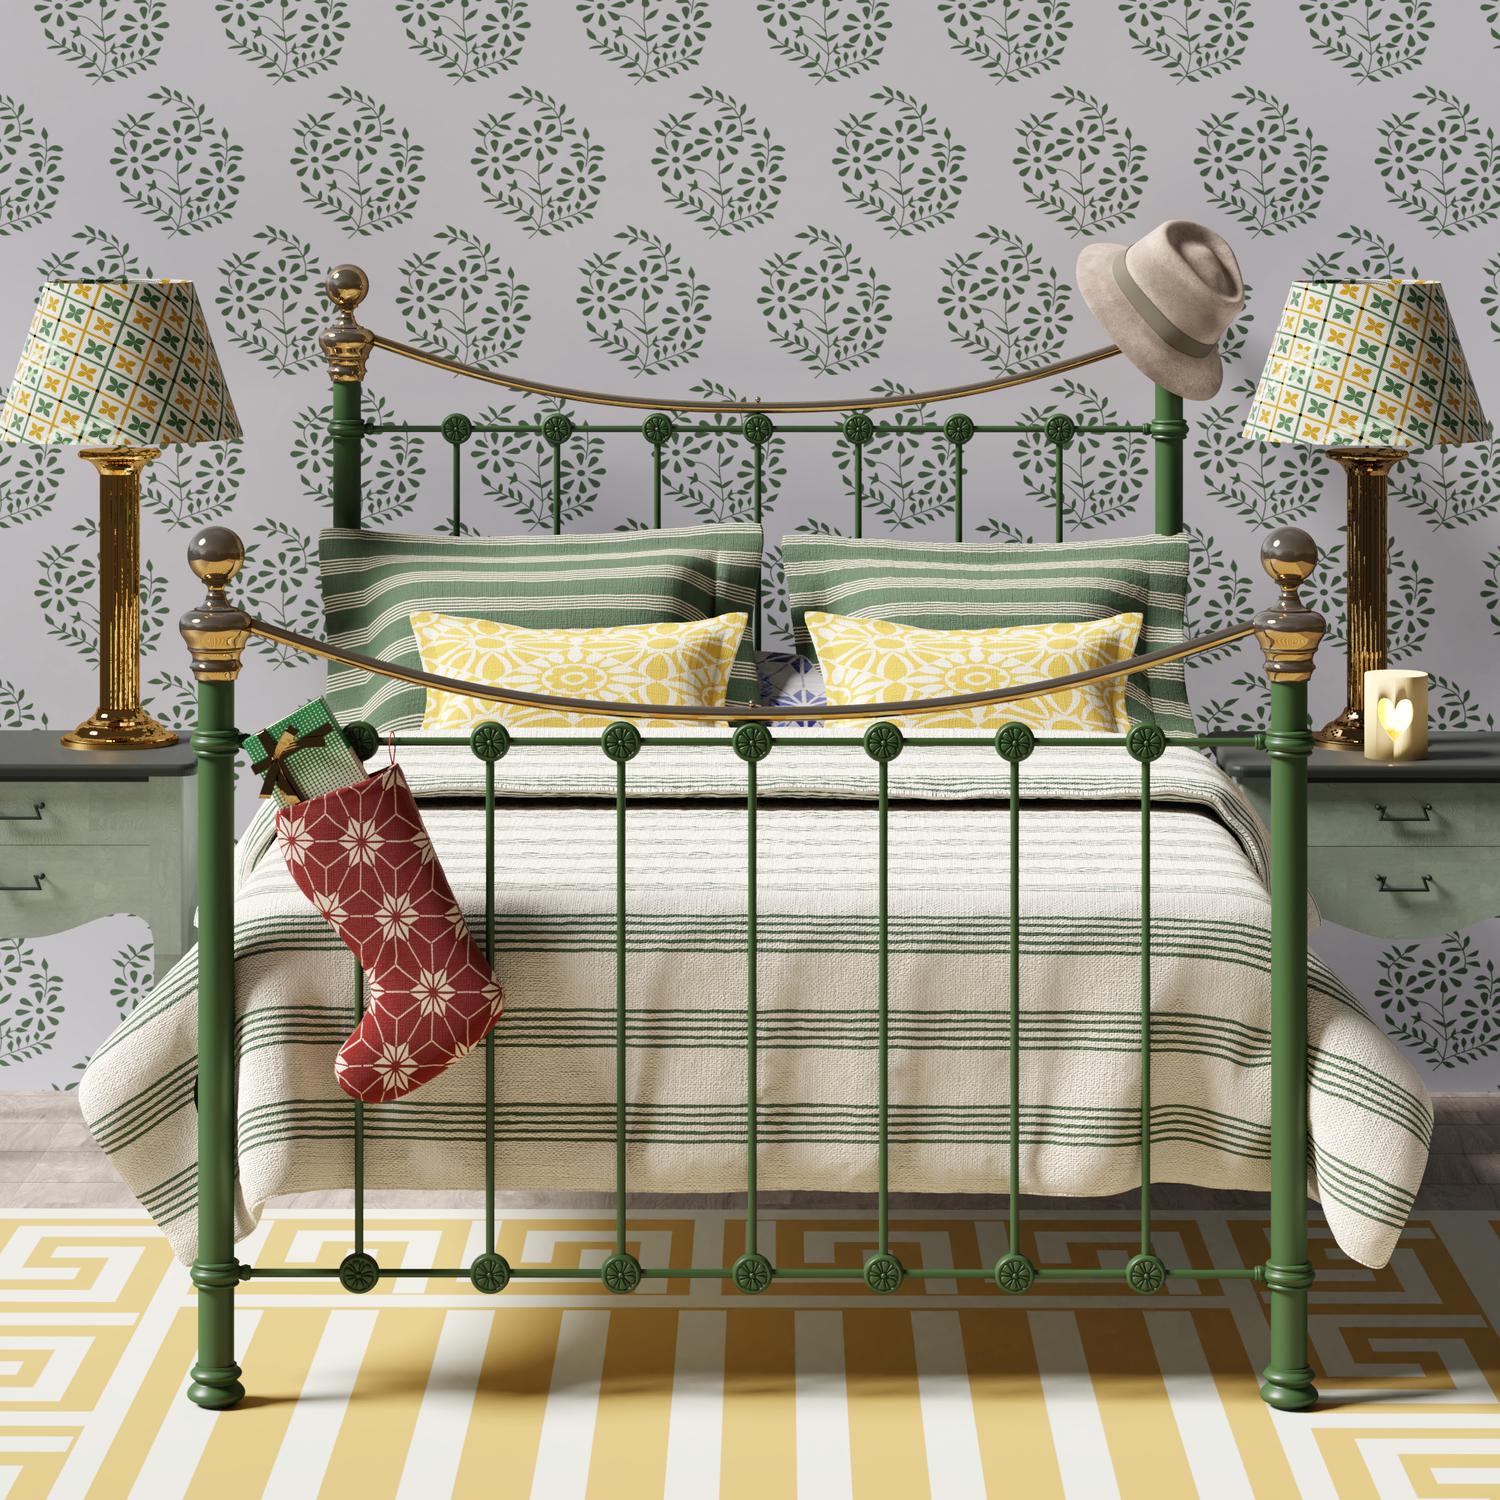 Selkirk iron bed - Image Green and gold bedroom